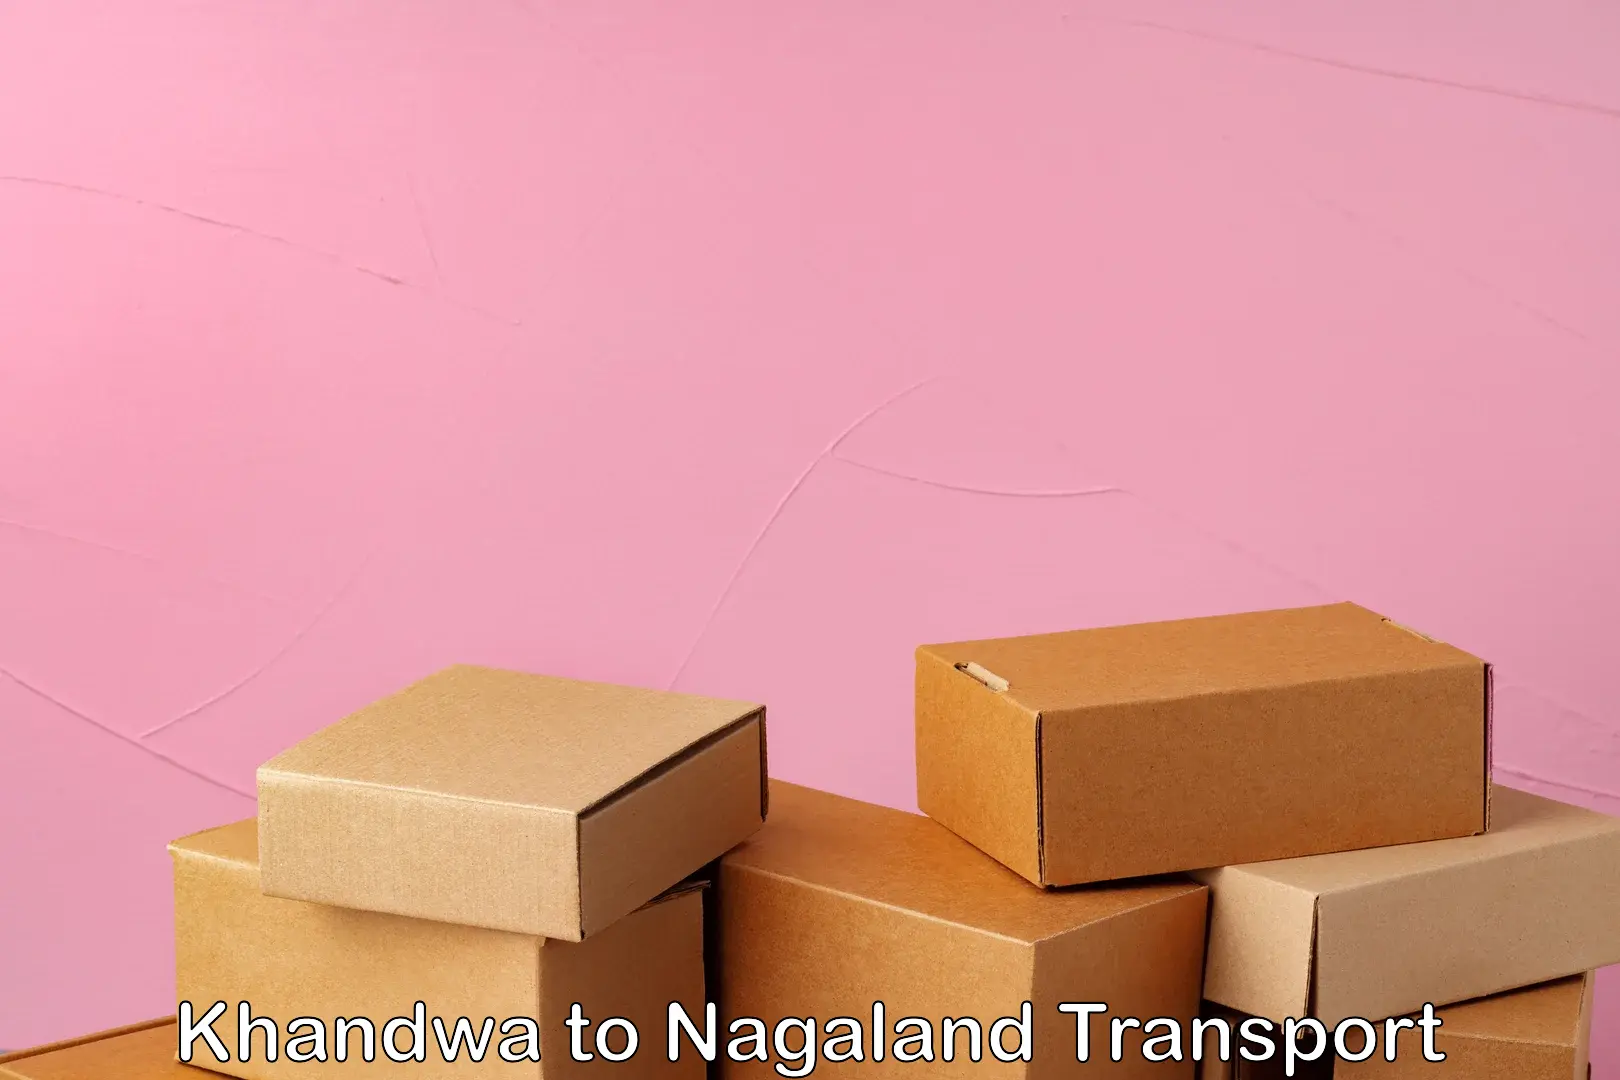 Container transport service Khandwa to Nagaland